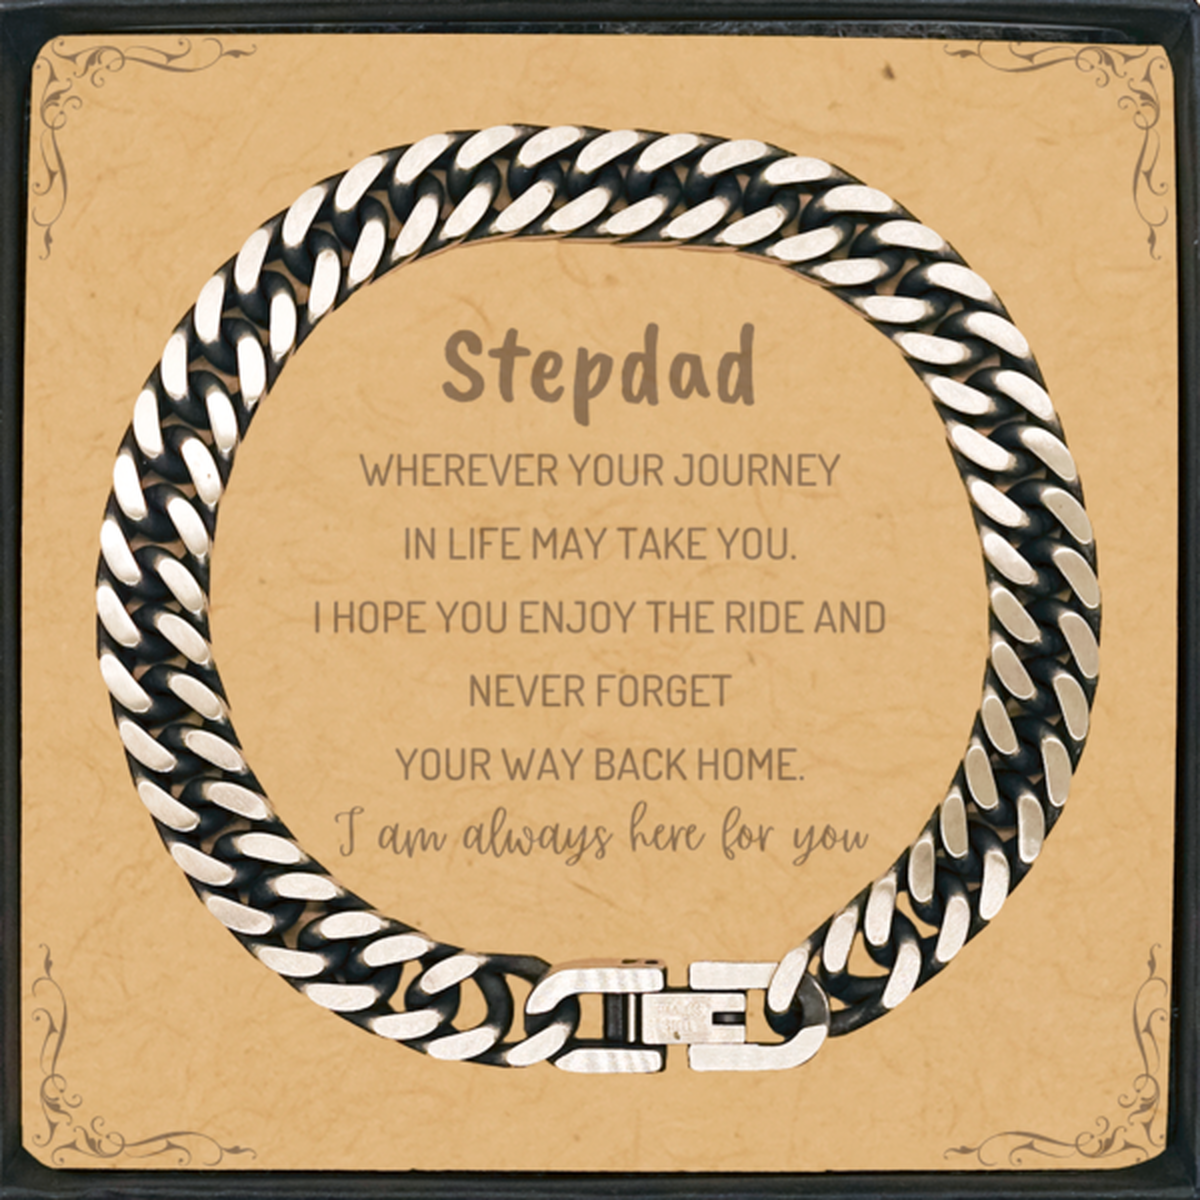 Stepdad wherever your journey in life may take you, I am always here for you Stepdad Cuban Link Chain Bracelet, Awesome Christmas Gifts For Stepdad Message Card, Stepdad Birthday Gifts for Men Women Family Loved One